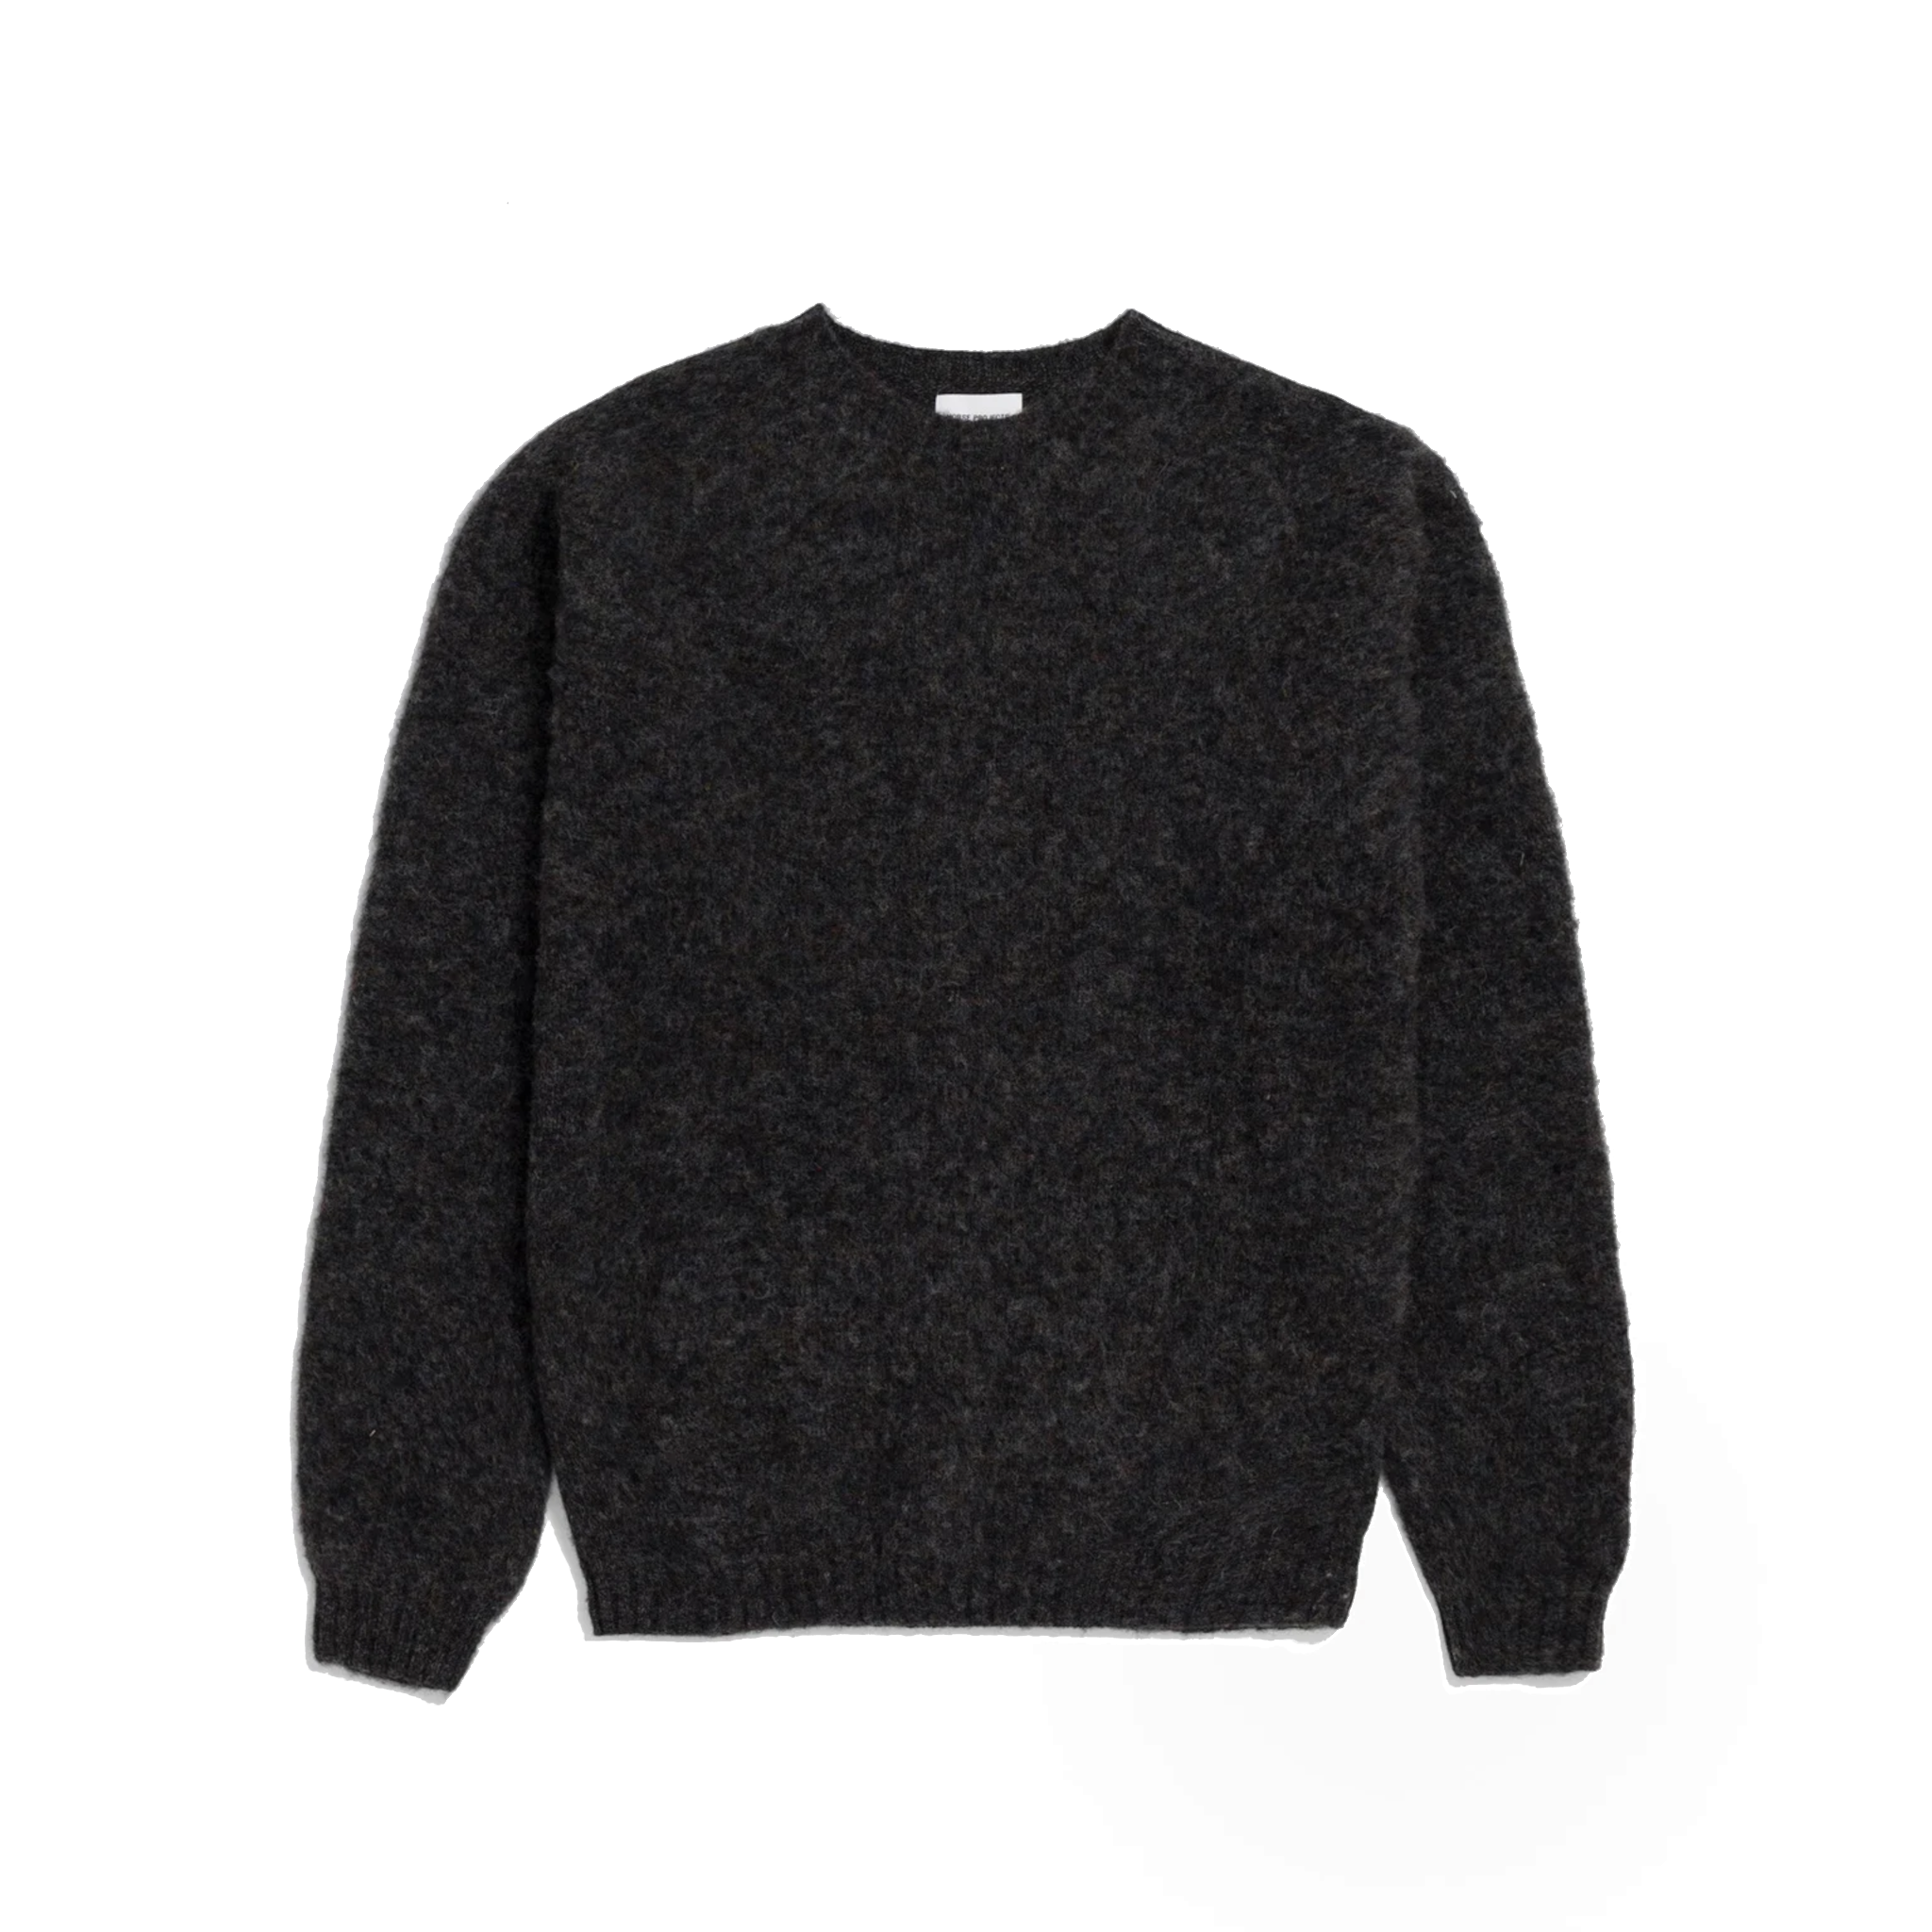 Birnir Brushed Lambswool - Charcoal Melange-Norse Projects-W2 Store